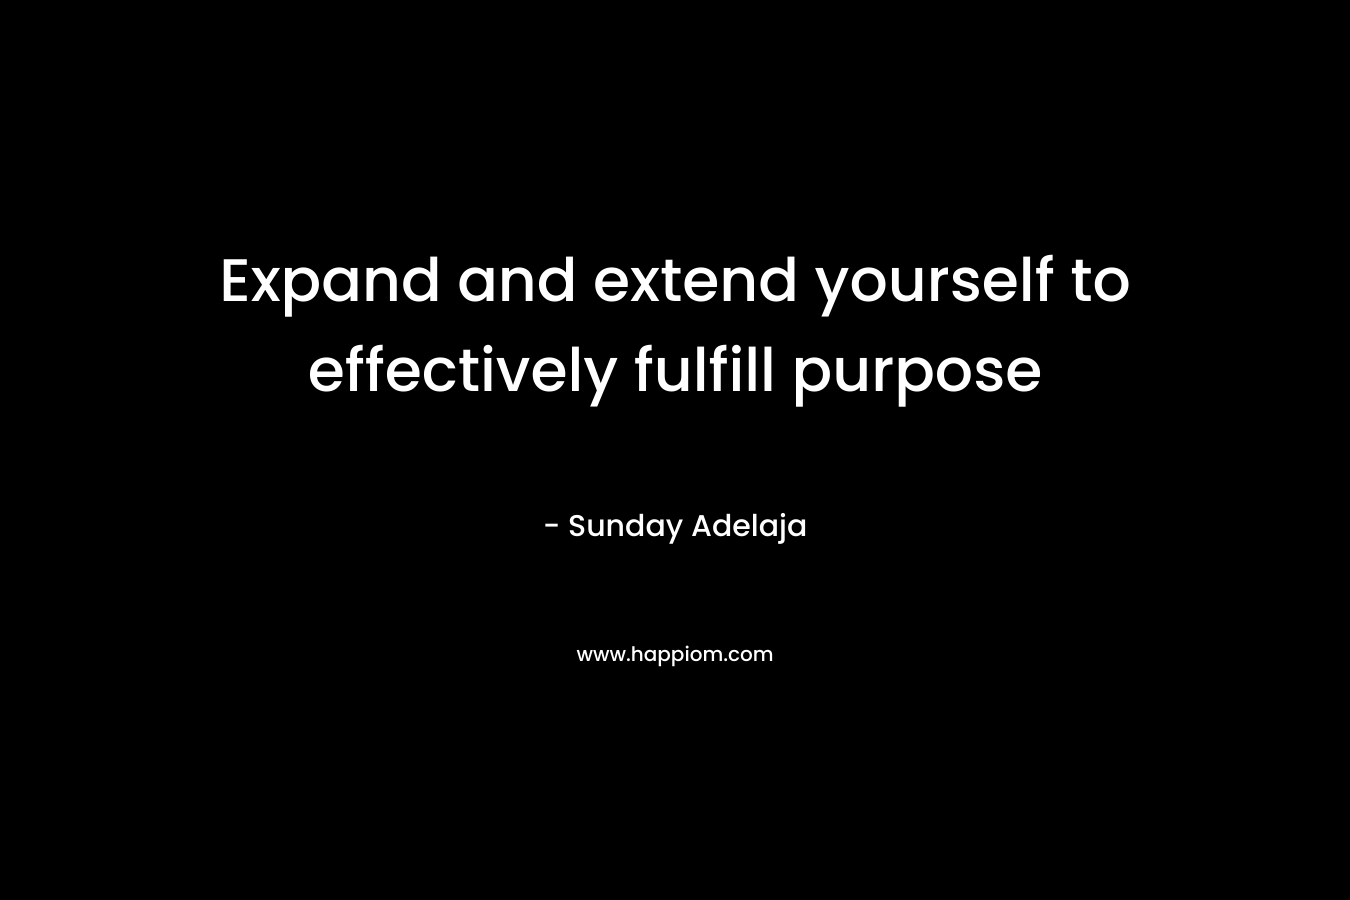 Expand and extend yourself to effectively fulfill purpose